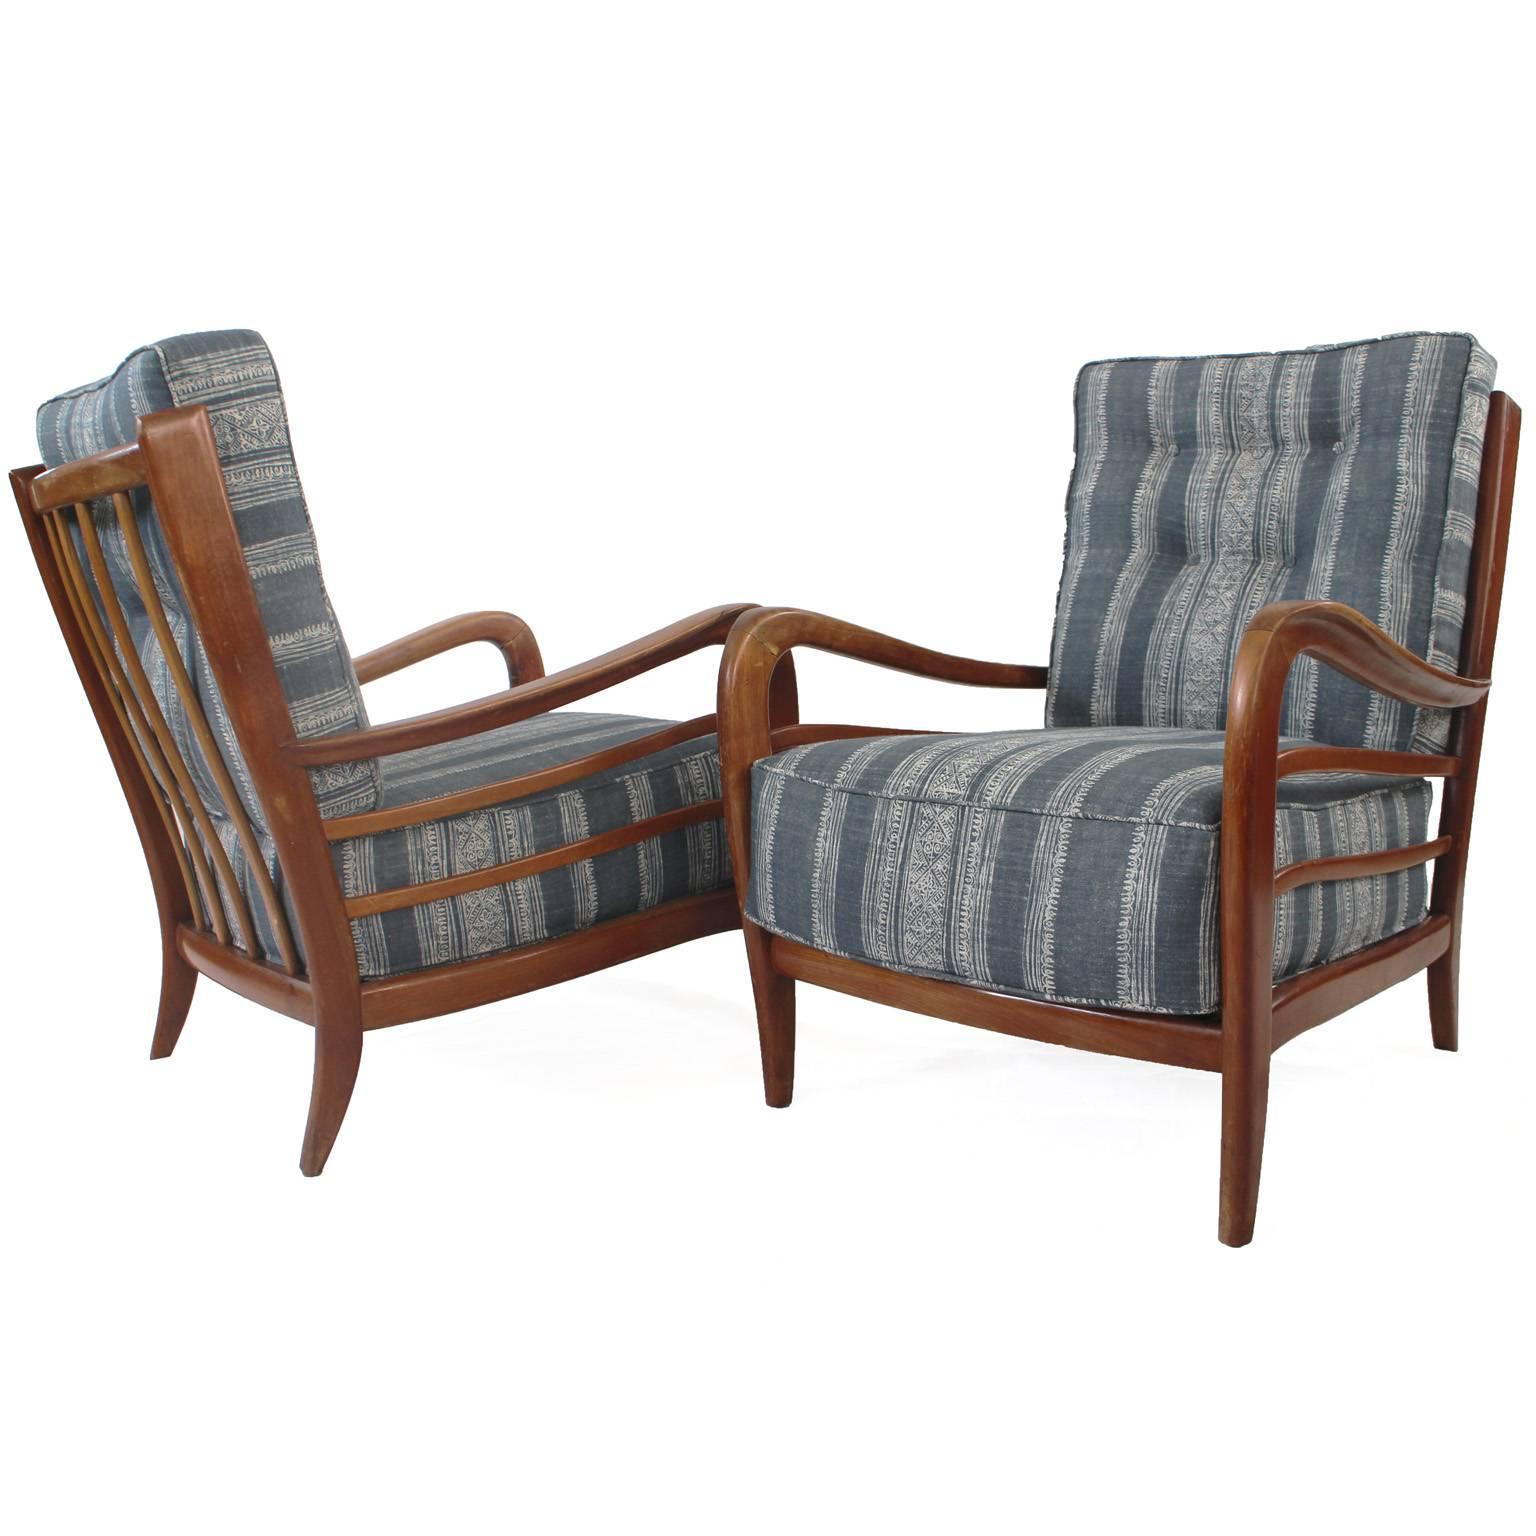 Pair of Paolo Buffa Italian lounge chairs
Upholstered in studio four NYC fabric.